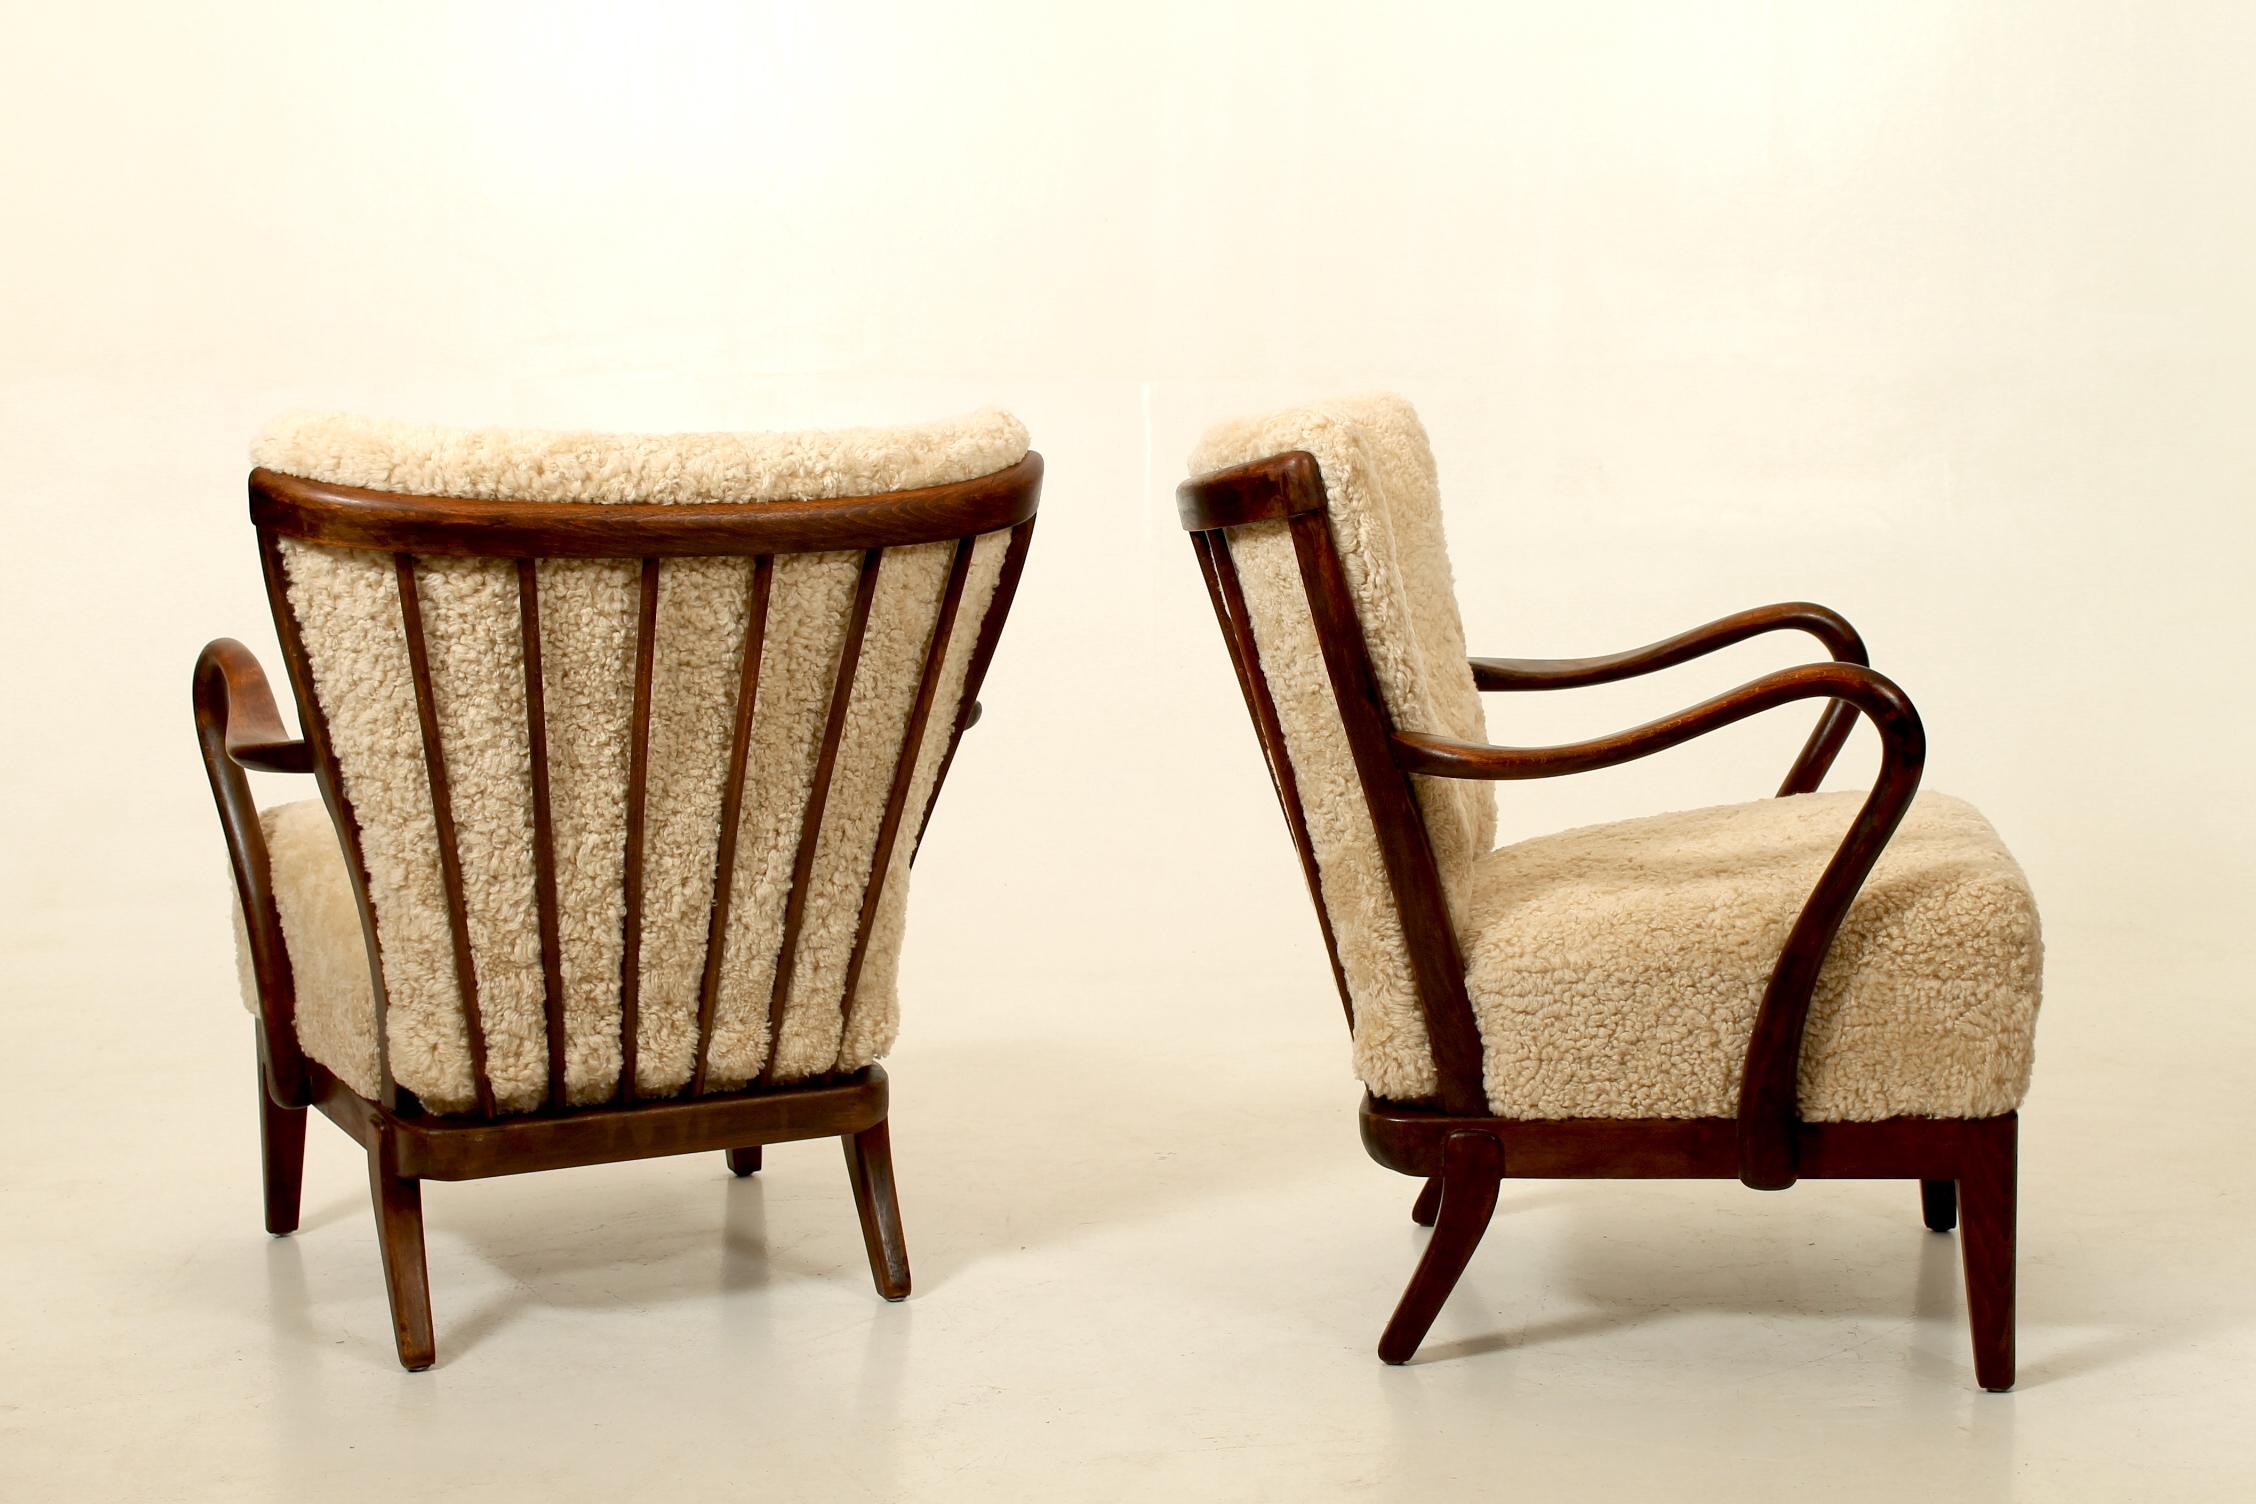 Danish Pair of 1940s lounge chairs by Alfred Christensen, Denmark.